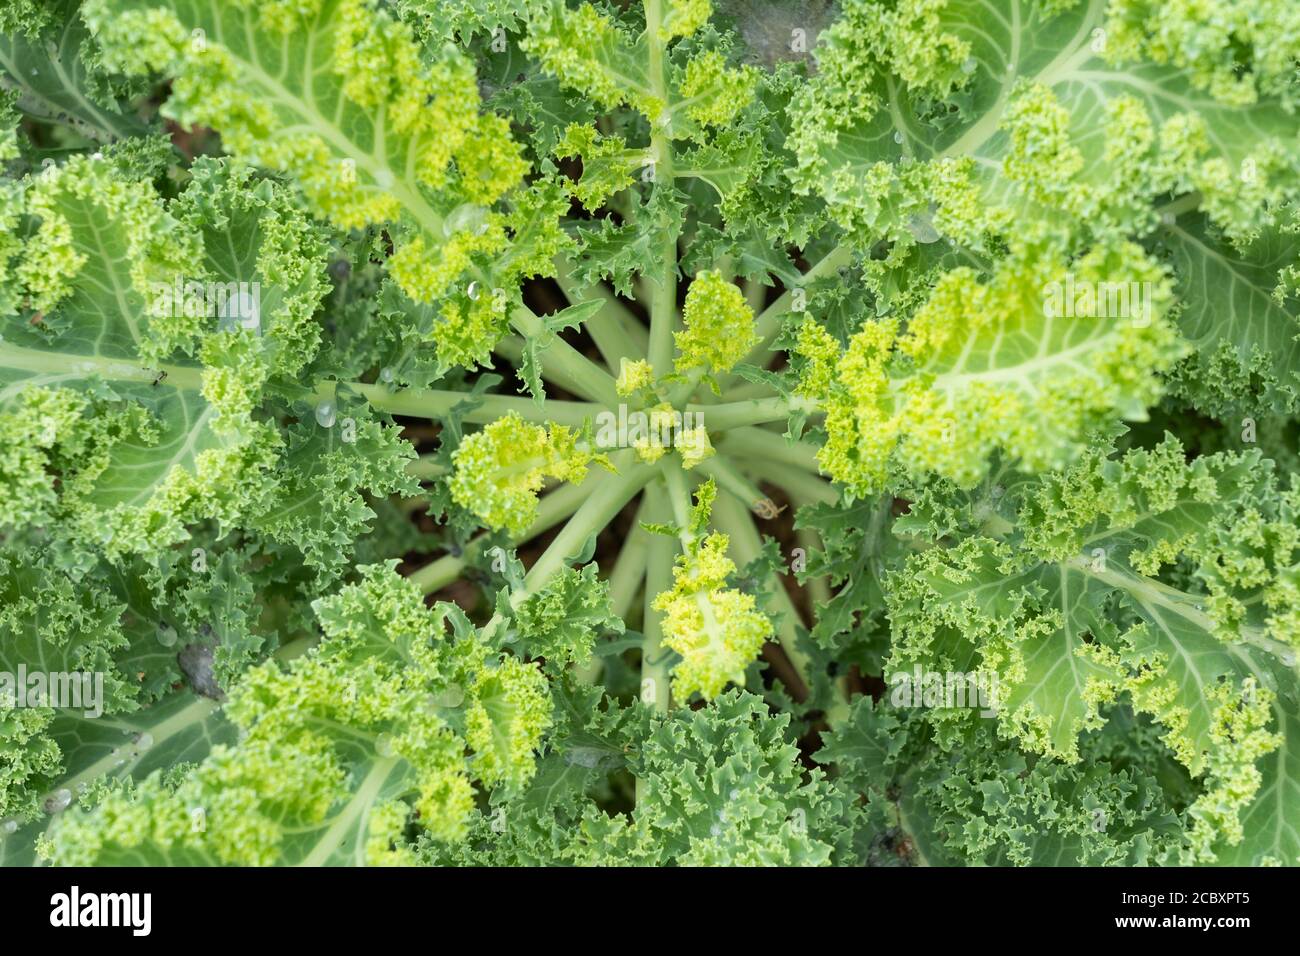 Curly Kale (Nero di Toscana - Brassica oleracea) belongs to a group of cabbage (Brassica oleracea) cultivars grown for their edible leaves Stock Photo